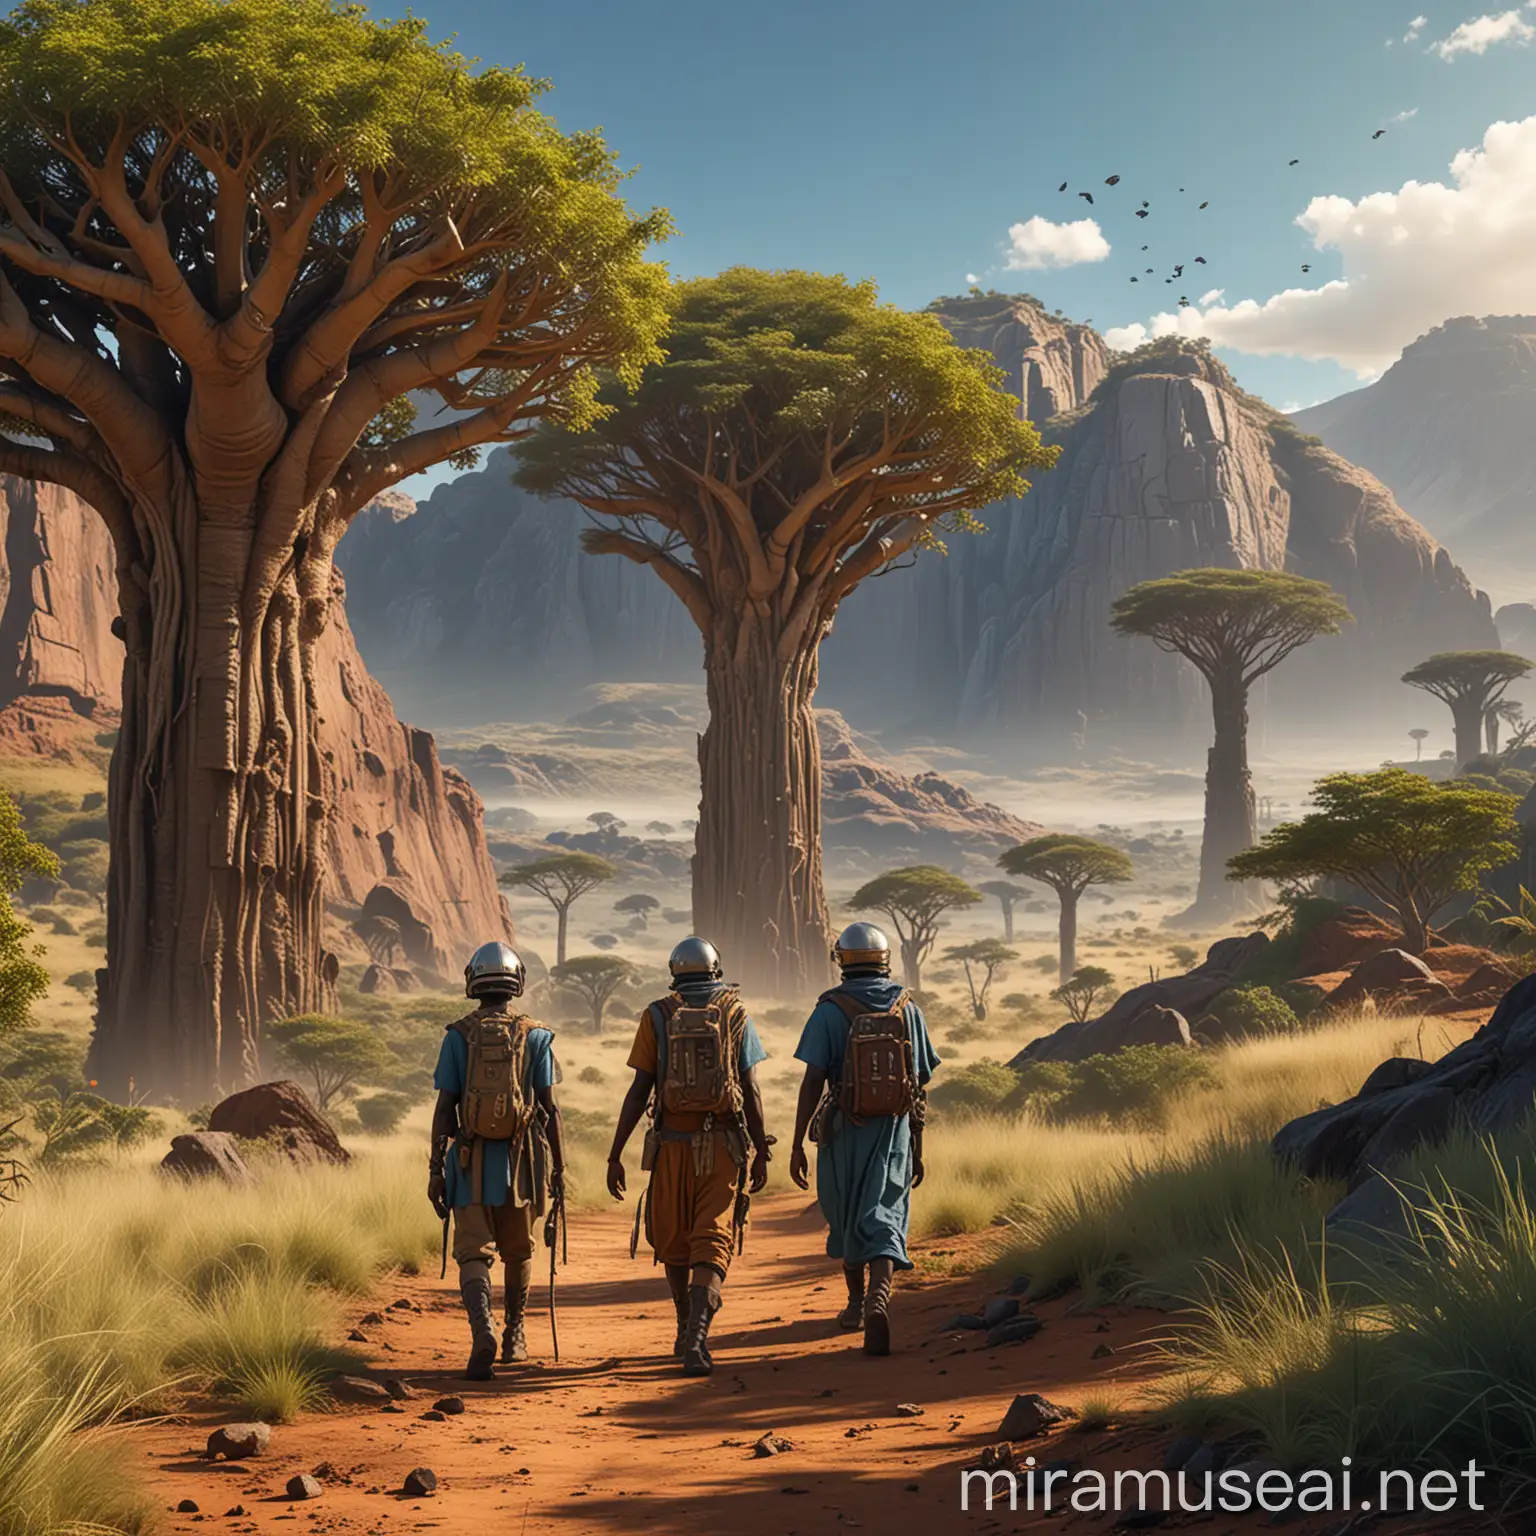 A group of early human explorers of African descent, mainly from southern Nigeria, arriving on the pristine slopes of a tropical savanna. The scene is set during a clear, sunny day with vibrant blue skies and a verdant savanna hills. The humans are depicted as futuristic seafaring tribes, disembarking from large, sleek, and technologically advanced airship. They are dressed in afrofuturistic styles with advanced materials, and subtle technological enhancements. The landscape is lined with tall acacias and towering baobas. The explorers display a mix of curiosity and determination as they step onto the grass, carrying advanced tools and supplies. In the background, distant volcanic mountains rise, adding a sense of awe and adventure. The overall atmosphere should convey the sense of a new beginning and the discovery of an uncharted world